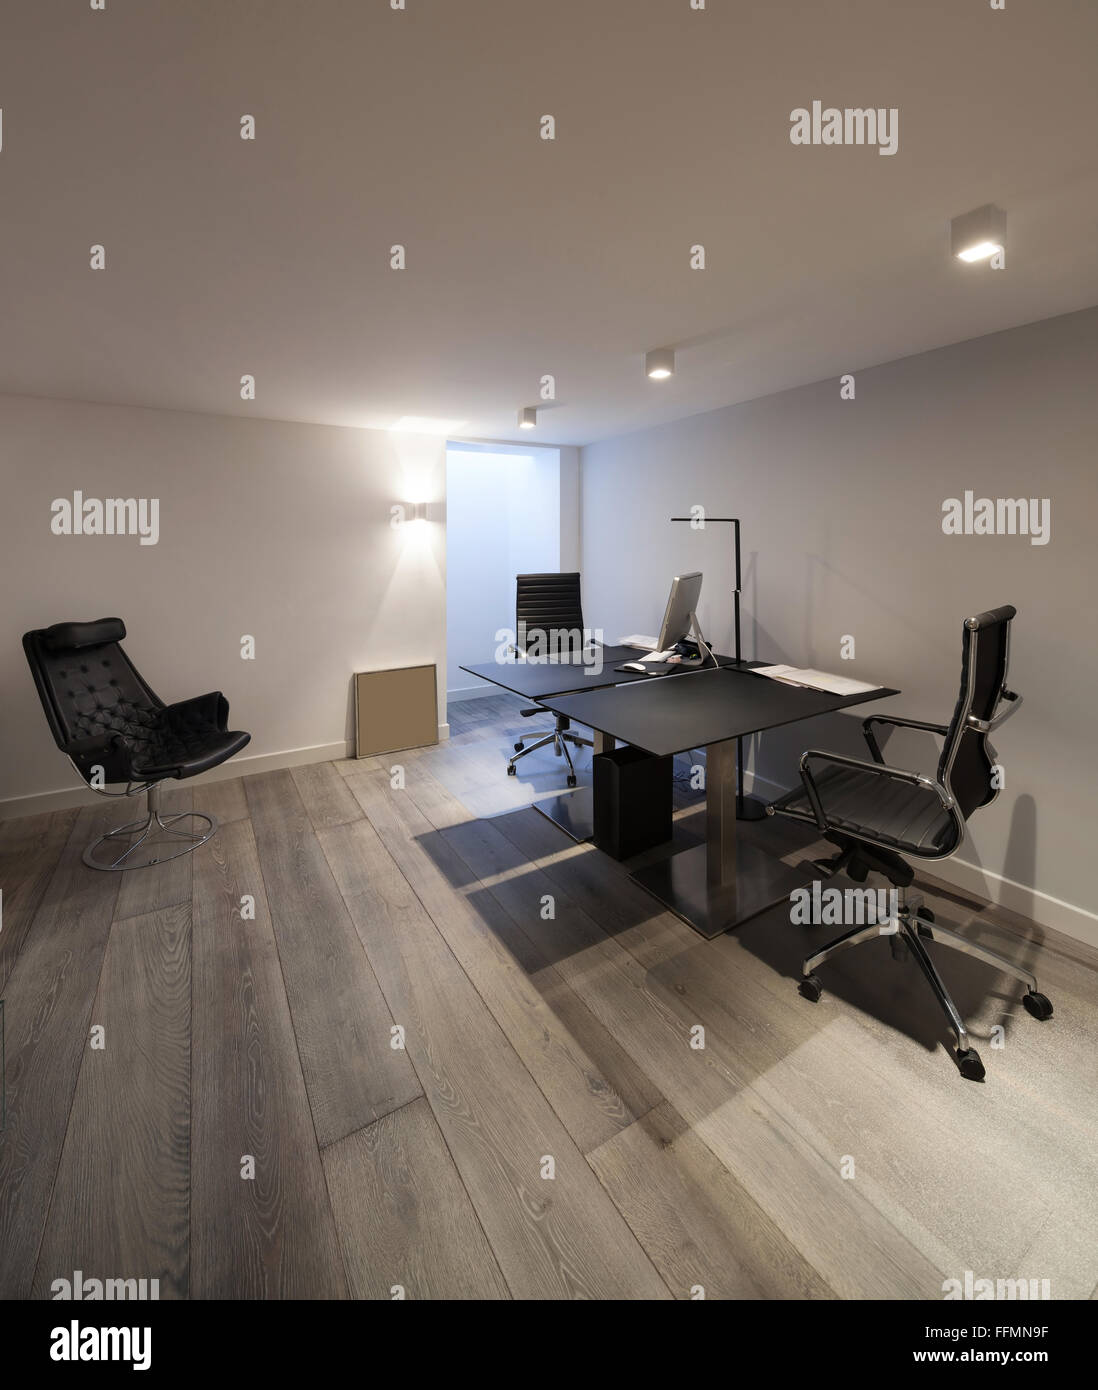 Interior of house, modern office with furniture design Stock Photo